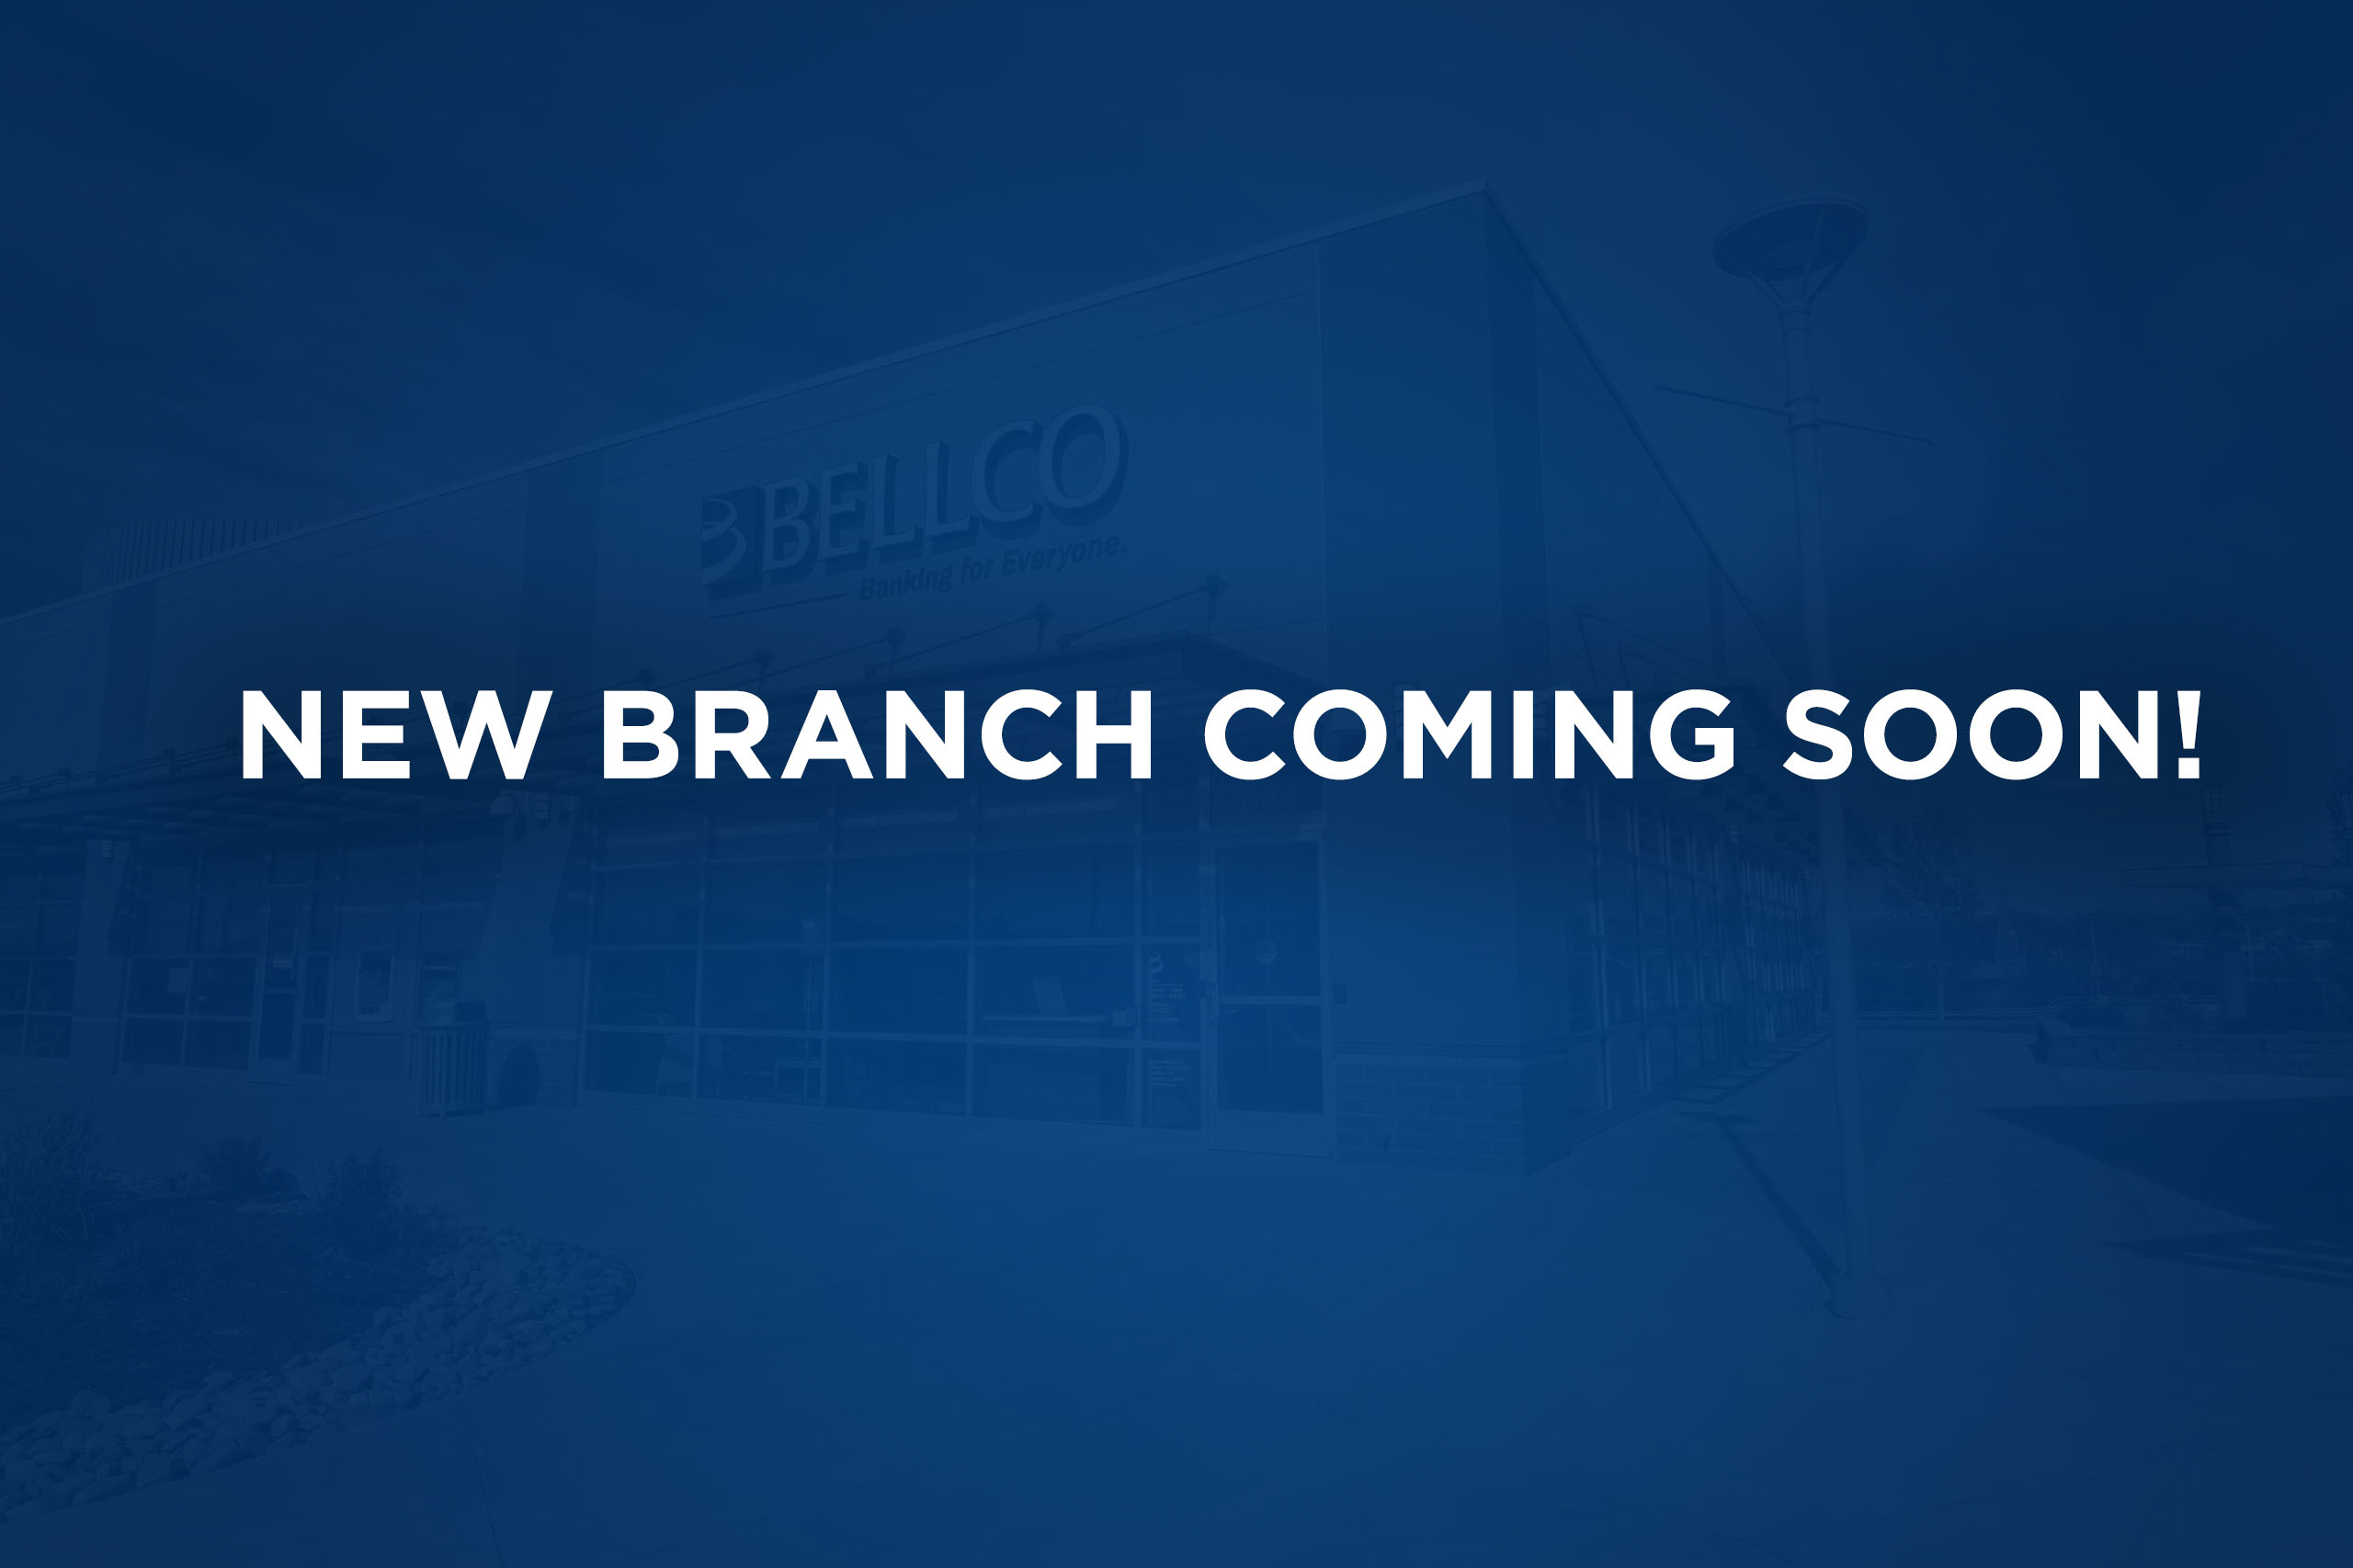 New branch coming soon!